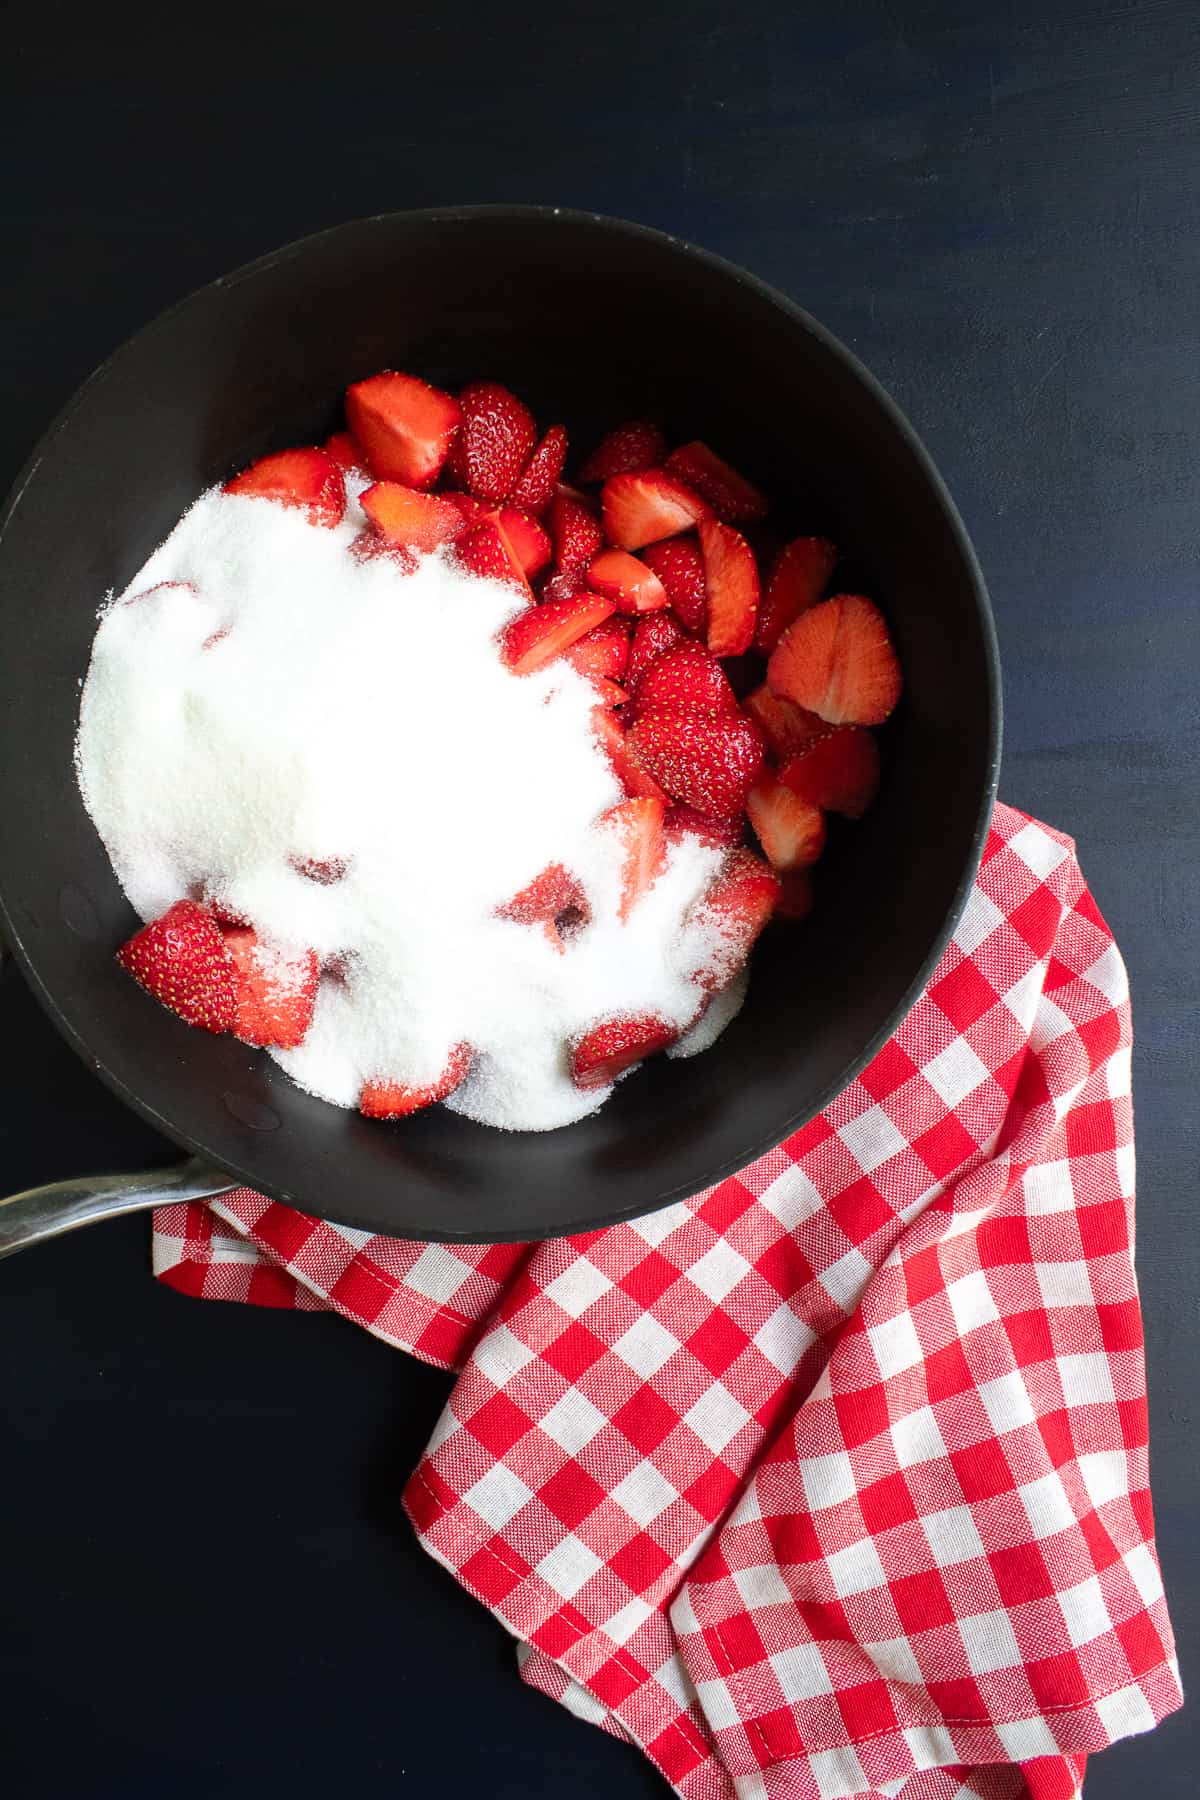 Strawberries and granulated sugar are piled into a black saucepan.